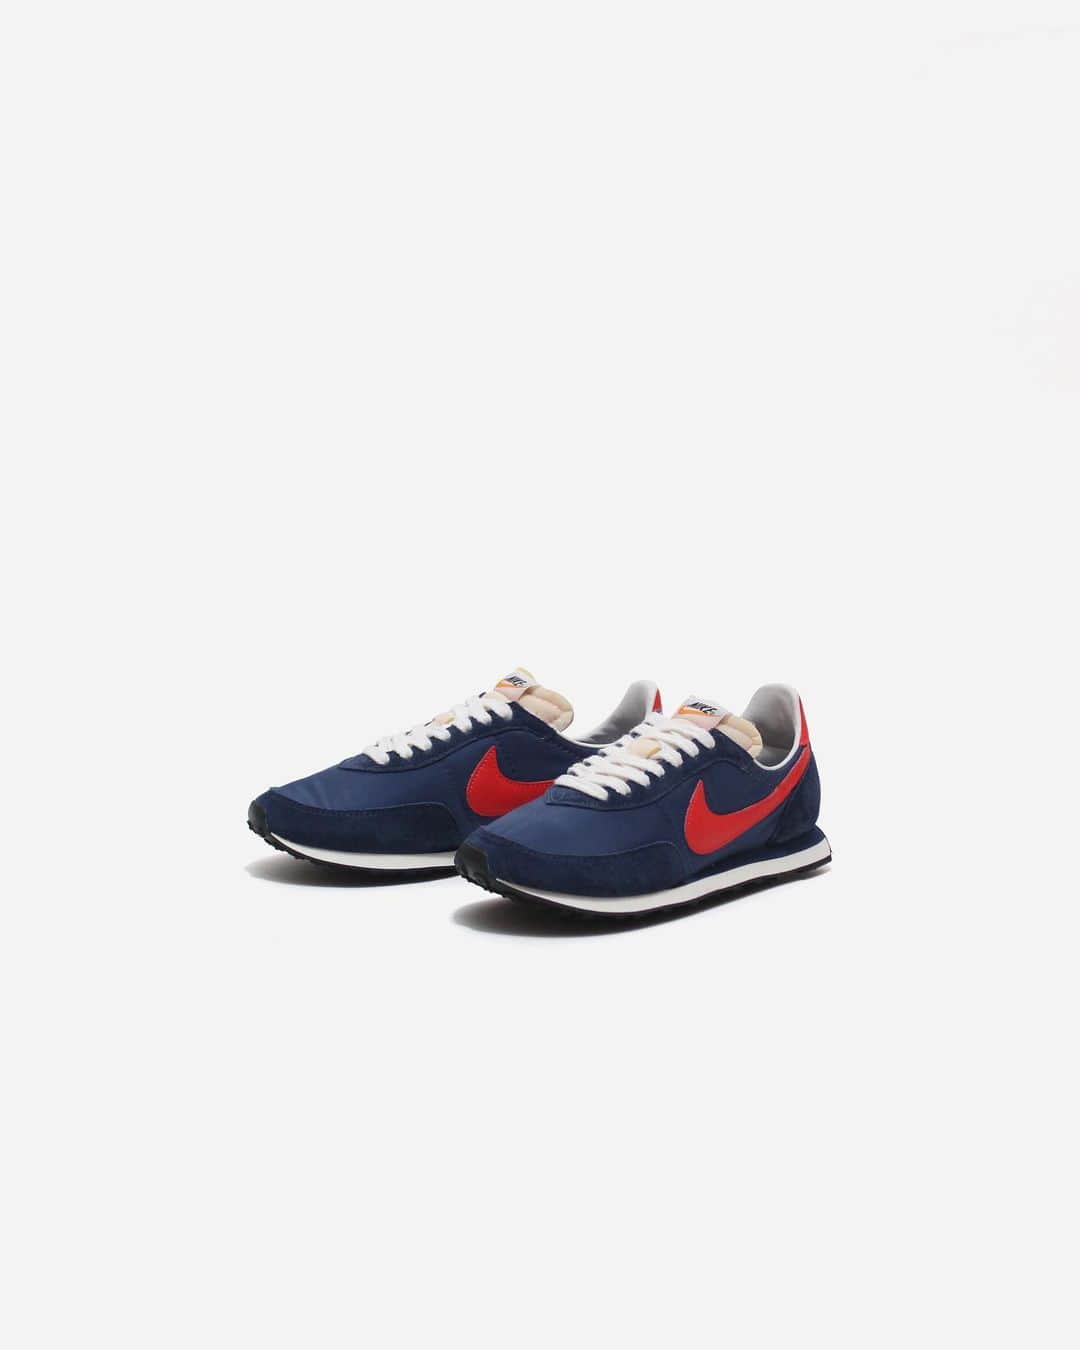 A+Sさんのインスタグラム写真 - (A+SInstagram)「2021. 2. 25 (thu) in store ﻿ ■NIKE WAFFLE TRAINER 2 SP﻿ COLOR : MIDNIGHT NAVY/MAX ORANGE-MYSTIC NAVY﻿ SIZE : 26.0cm-29.0cm﻿ PRICE : ¥12,100 (tax incl.) ﻿ モカシンをイメージしたアッパーとワッフルアウトソールが、1977年のオリジナルを彷彿とさせるワッフル トレーナー 2。ウエッジミッドソールで伝説のシルエットを強化しつつ、形状記憶フォームのソックライナーや密度の異なる2種類のフォームミッドソールを採用して、最新のアップデートを施した。世界レベルの職人技を駆使したナイロンとスエードの組み合わせに、クラシックなアウトソールがあらゆる路面で耐久性に優れたトラクションを発揮する。このエディションでは、ベースカラーのミッドナイトネイビーに、マックスオレンジがエネルギッシュなアクセントを添える。﻿ ﻿ A waffle trainer 2 with a moccasin-inspired upper and waffle outsole that is reminiscent of the 1977 original. While enhancing the legendary silhouette with the wedge midsole, we have adopted the sockliner of shape memory foam and two types of foam midsole with different densities, and made the latest update. A combination of world-class craftsmanship in nylon and suede, the classic outsole provides durable traction on all surfaces. In this edition, Max Orange adds an energetic accent to the base color Midnight Navy.﻿ ﻿ #a_and_s﻿ #NIKE﻿ #NIKEWAFFLETRAINER﻿ #NIKEWAFFLETRAINER2SP」2月22日 12時32分 - a_and_s_official